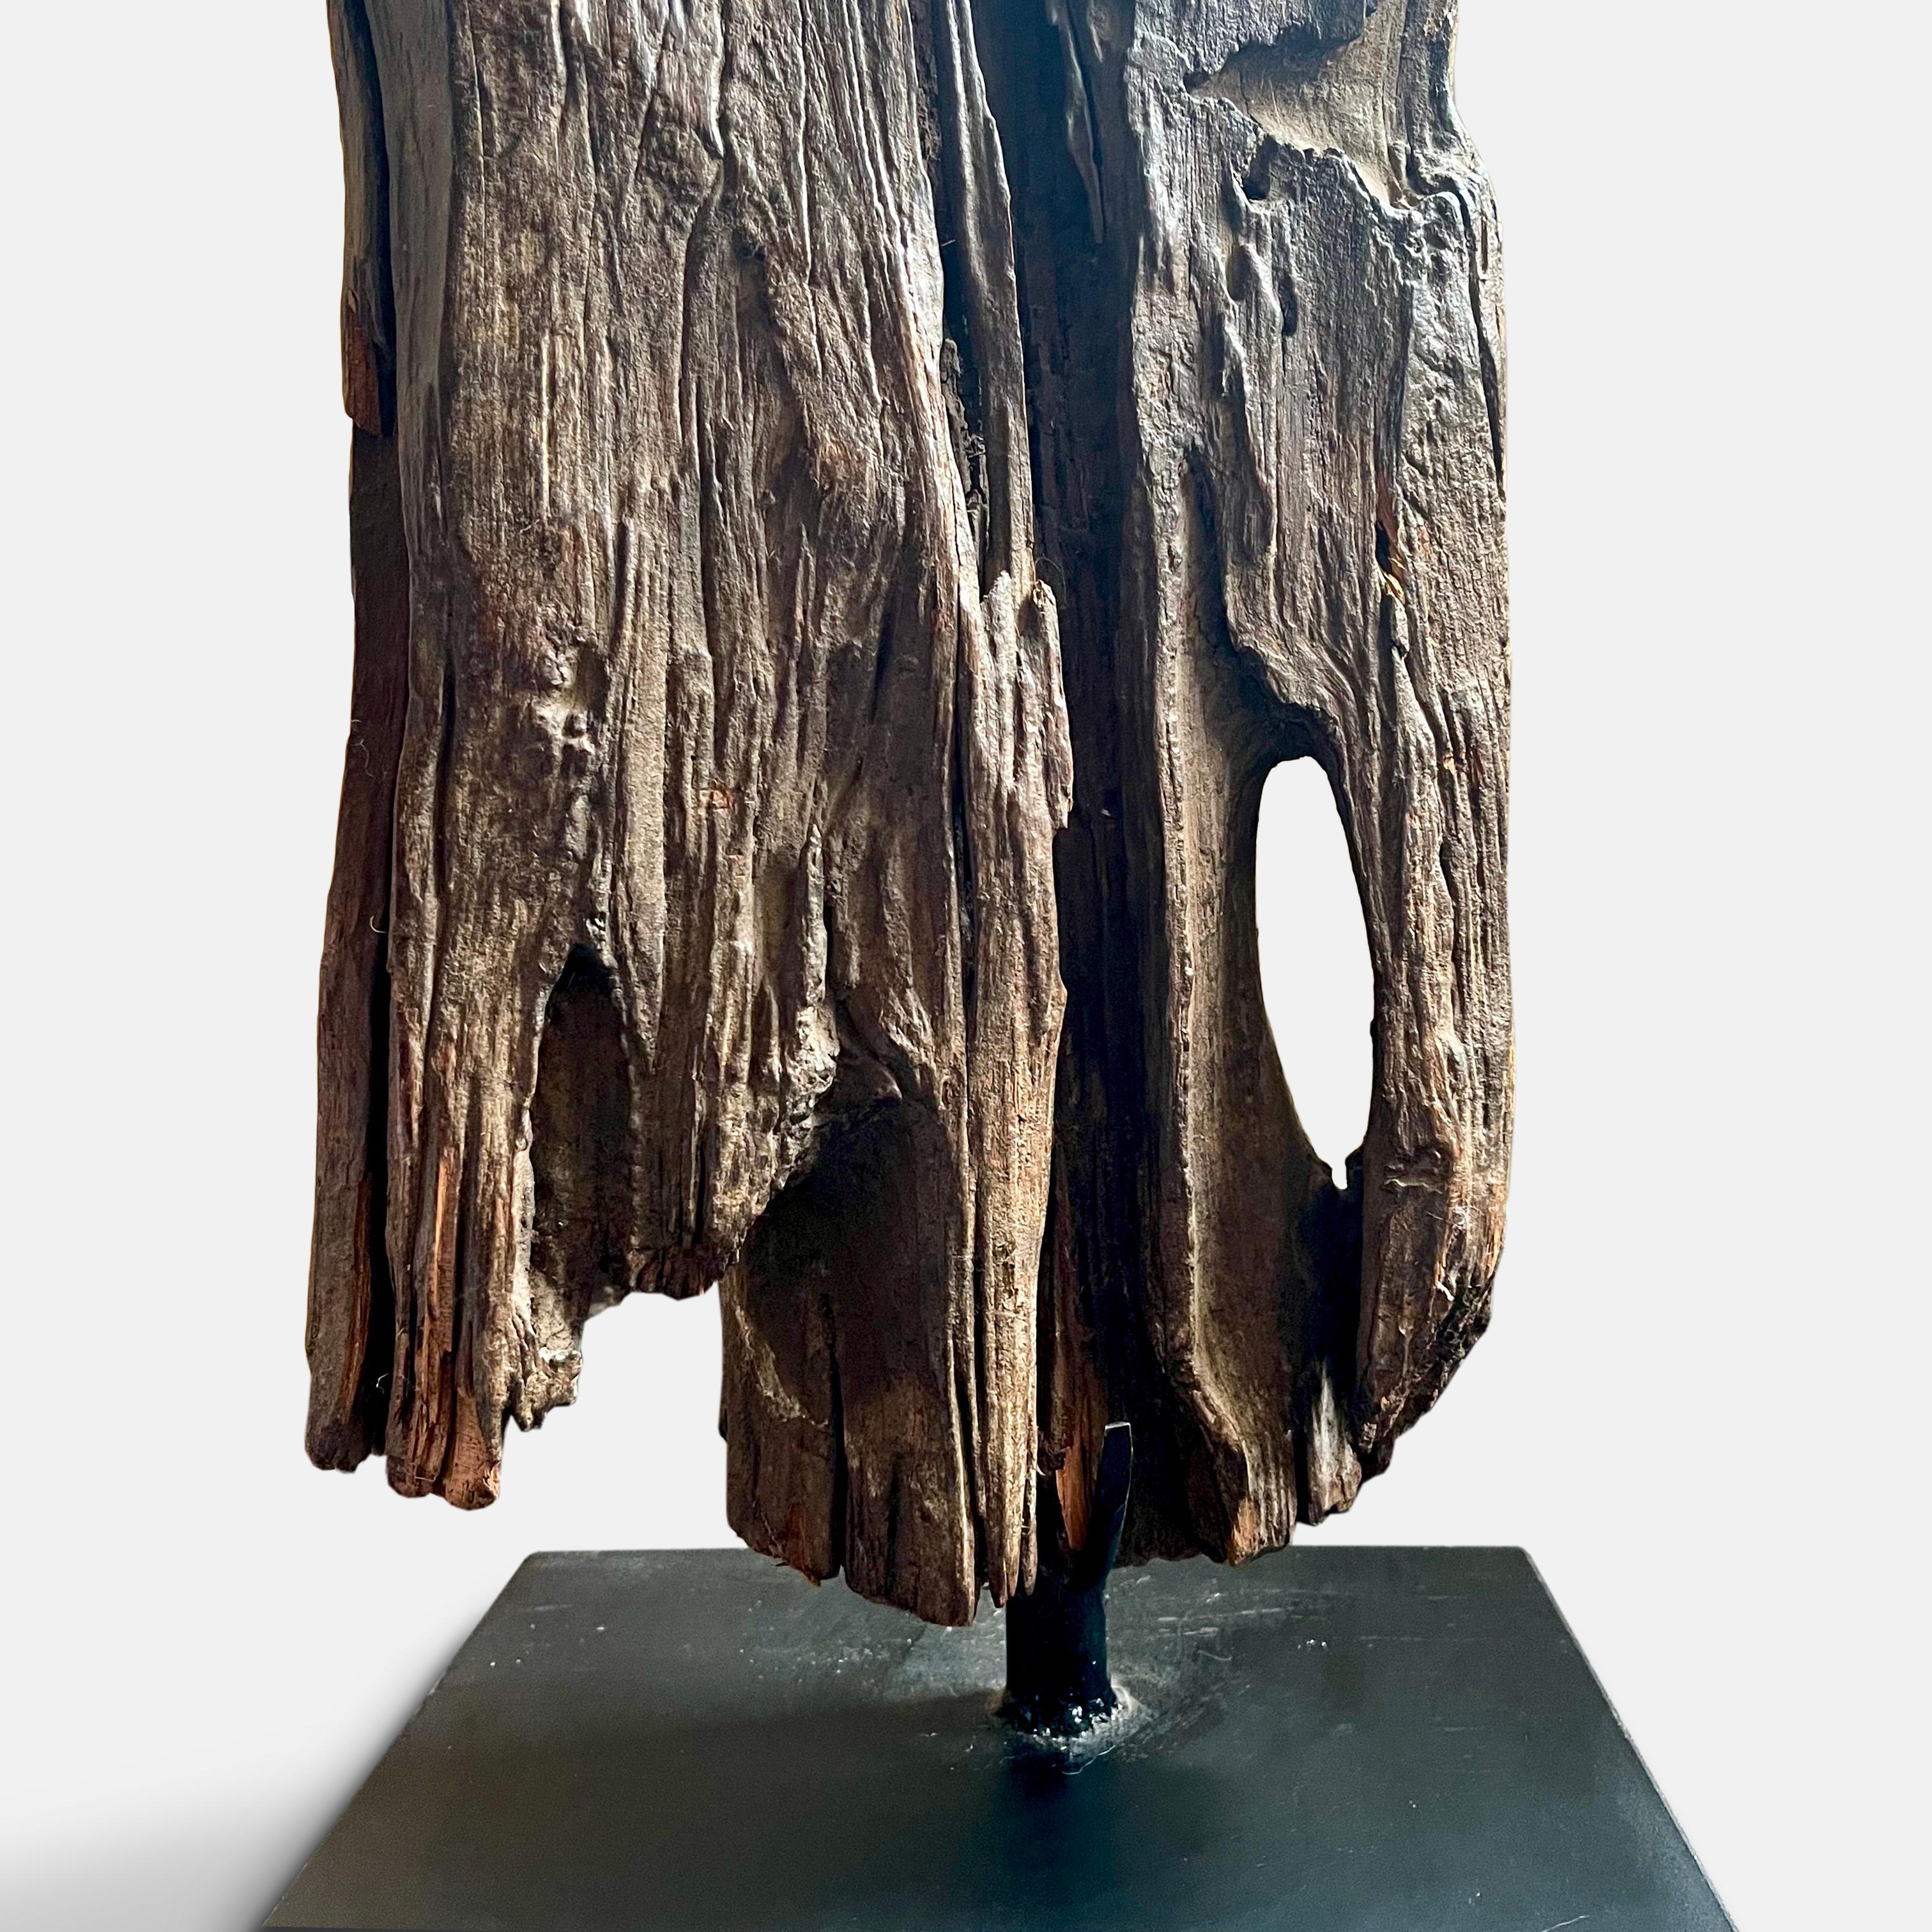 With a beautiful dark patina of regular use, and dating from the late 19th or early 20th century, this thick board with its deeply inscribed vertical lines, is of the type used by the Gurage people of Ethiopia. Planted upright in the ground, as seen